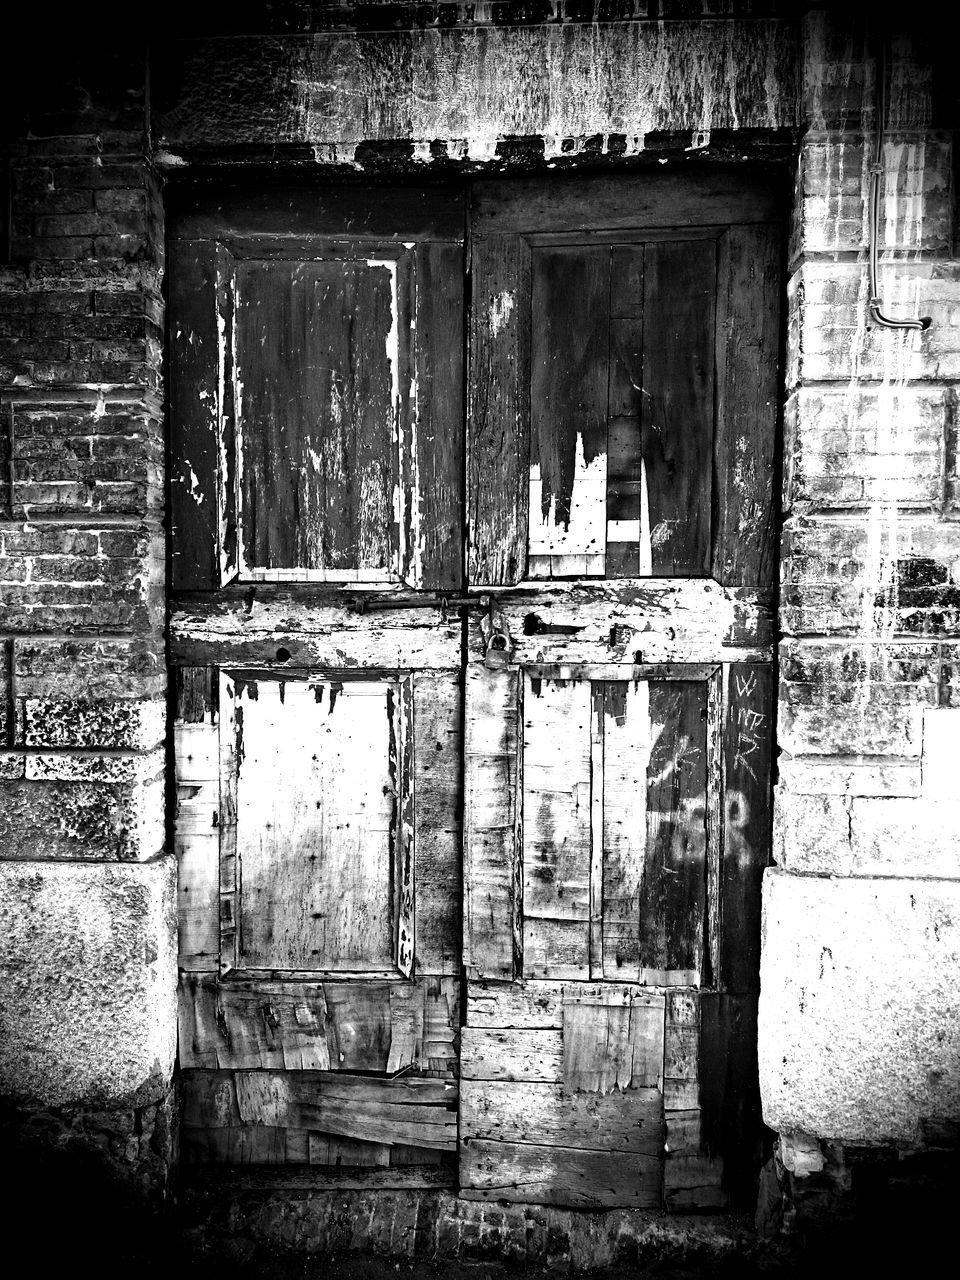 architecture, built structure, old, building exterior, abandoned, weathered, damaged, door, wall - building feature, obsolete, deterioration, run-down, closed, window, bad condition, house, wall, brick wall, wood - material, day